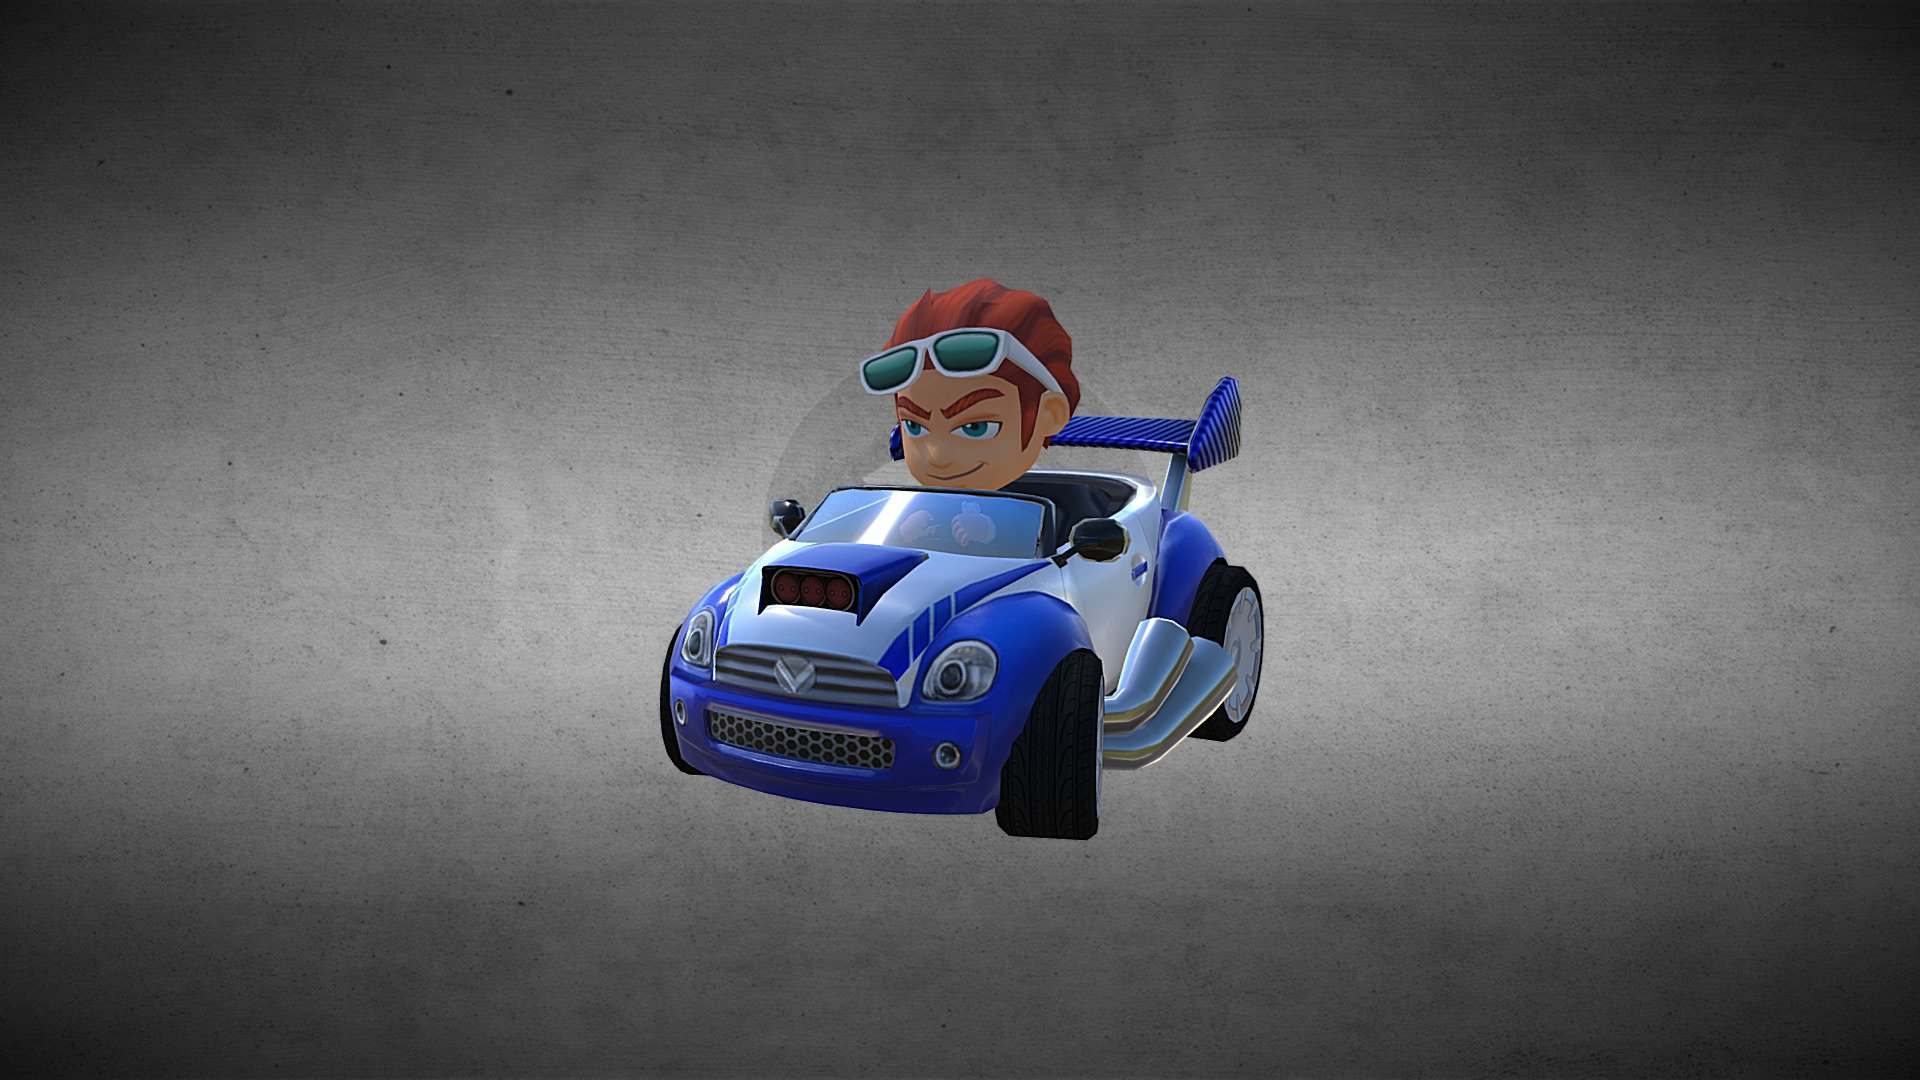 3D model with character showing vehicle upgrades - Mini Bee - 3D model by Zimster 3d model